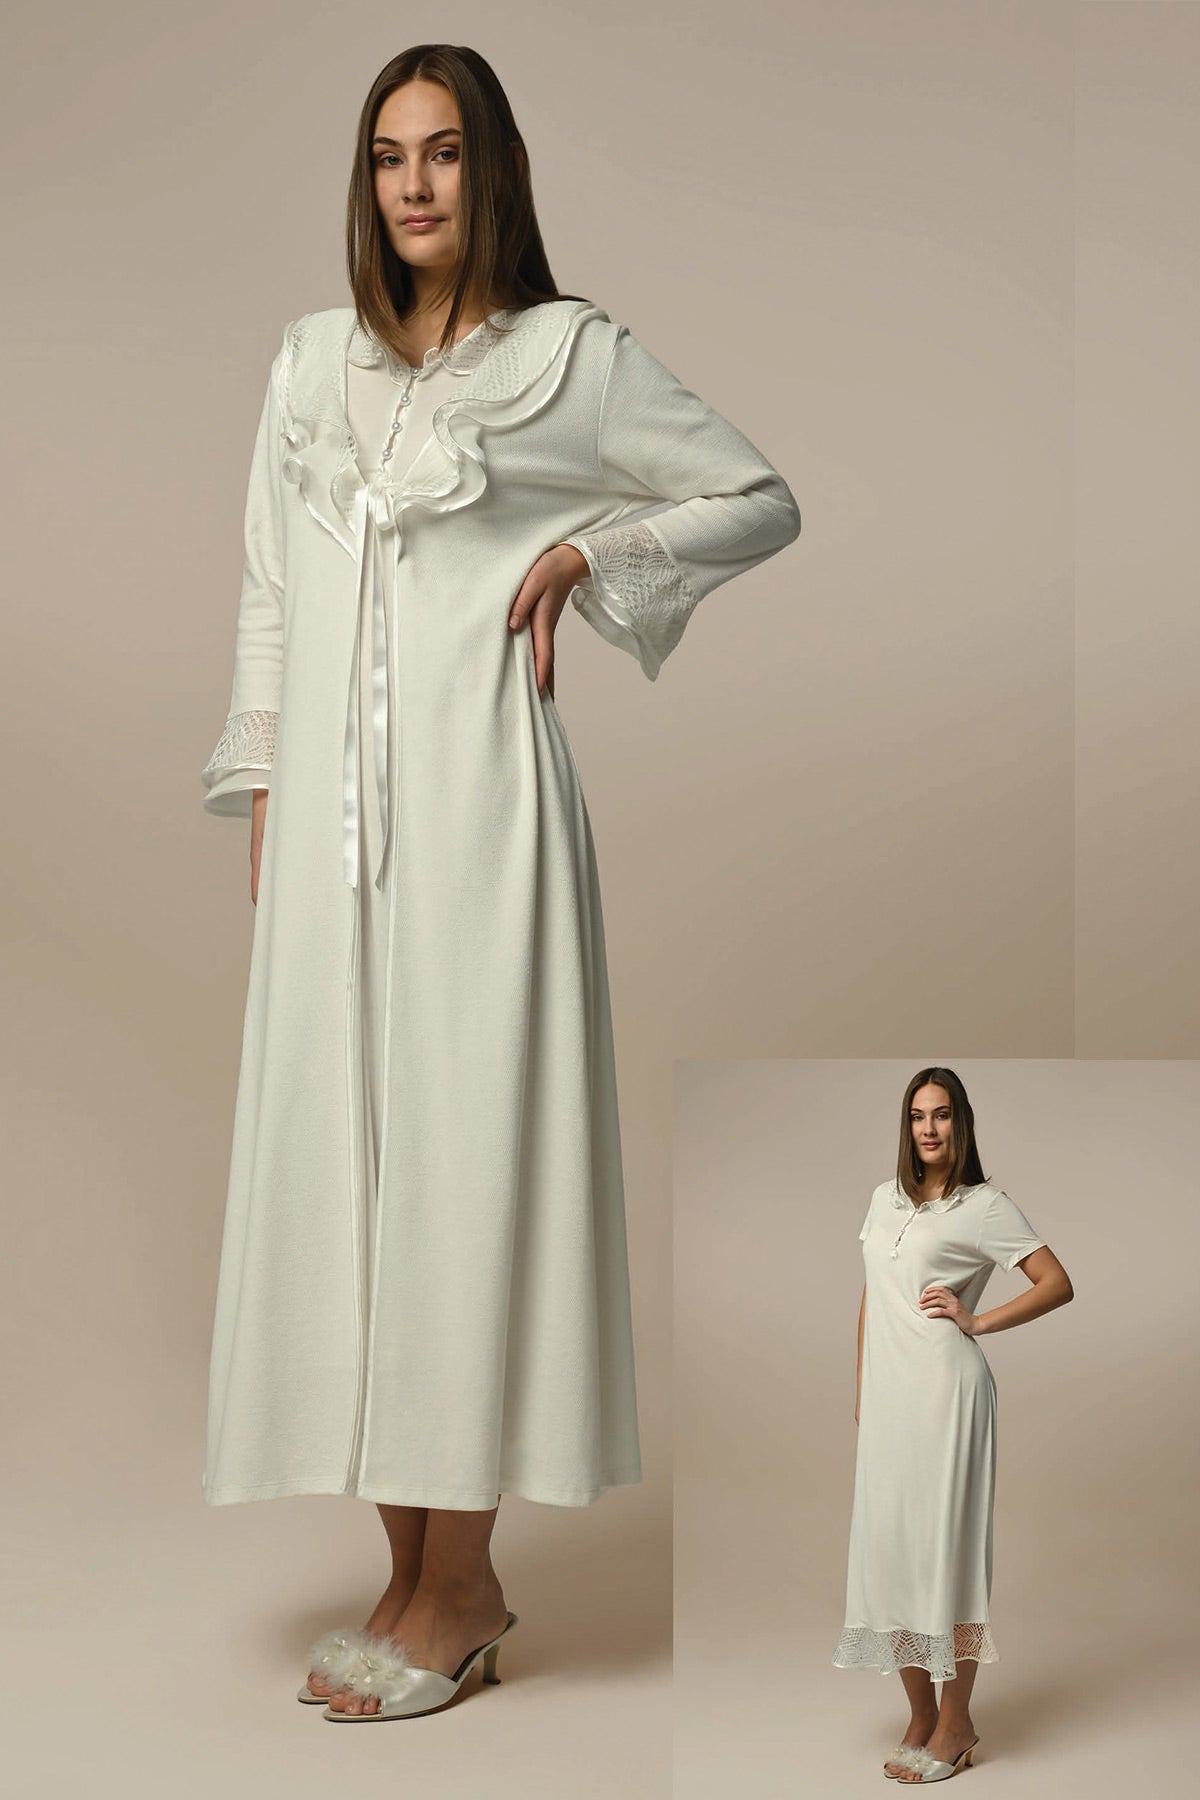 Lace Skirt Maternity & Nursing Nightgown With Robe Ecru - 24513